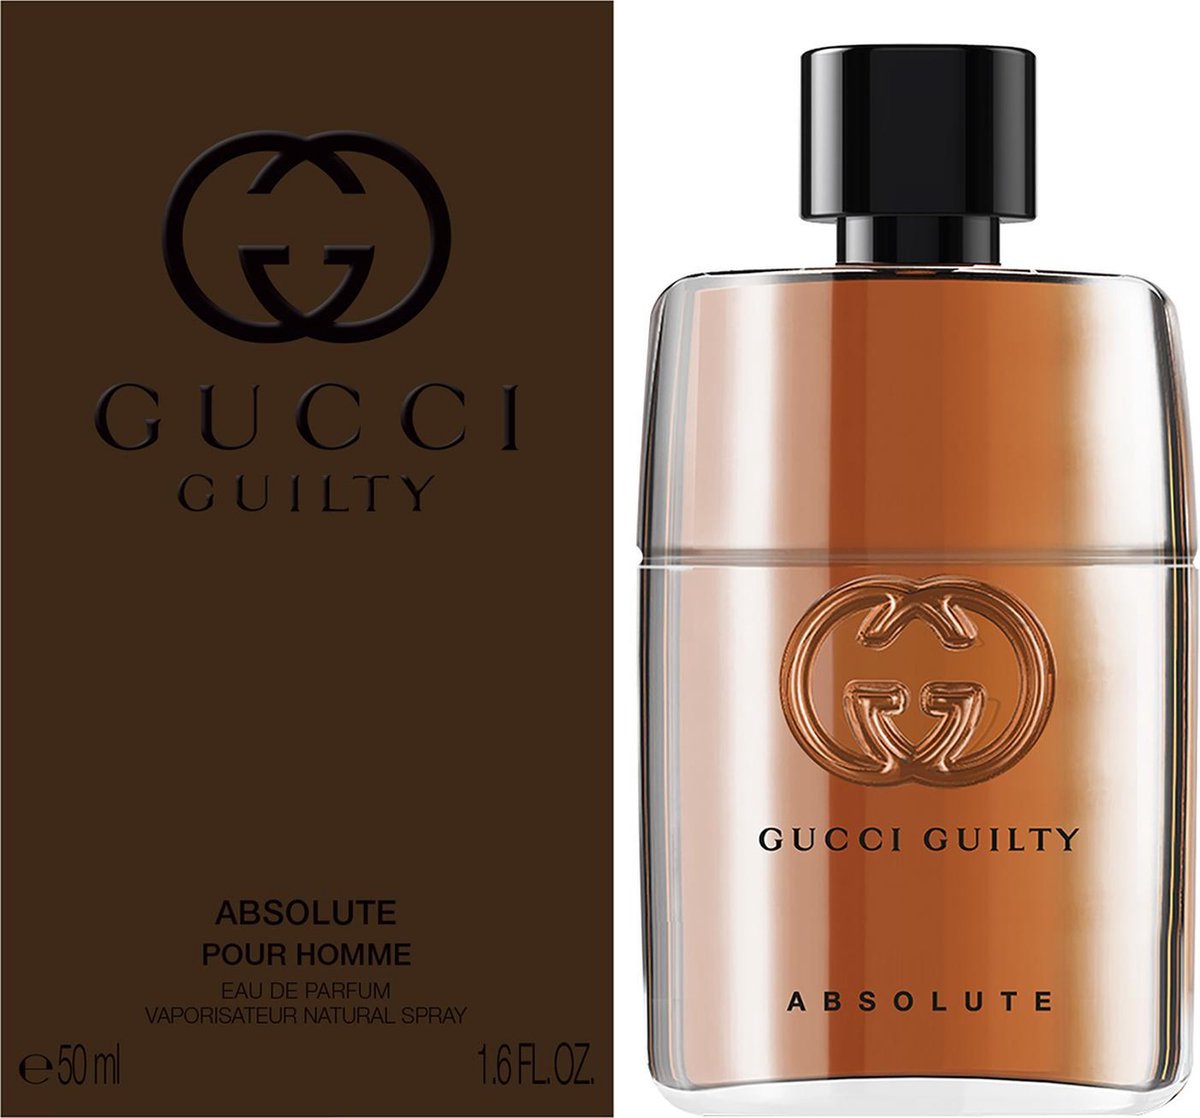 Gucci guilty absolute pour homme 50ml. Gucci guilty absolute pour homme. Gucci guilty Parfum pour homme.